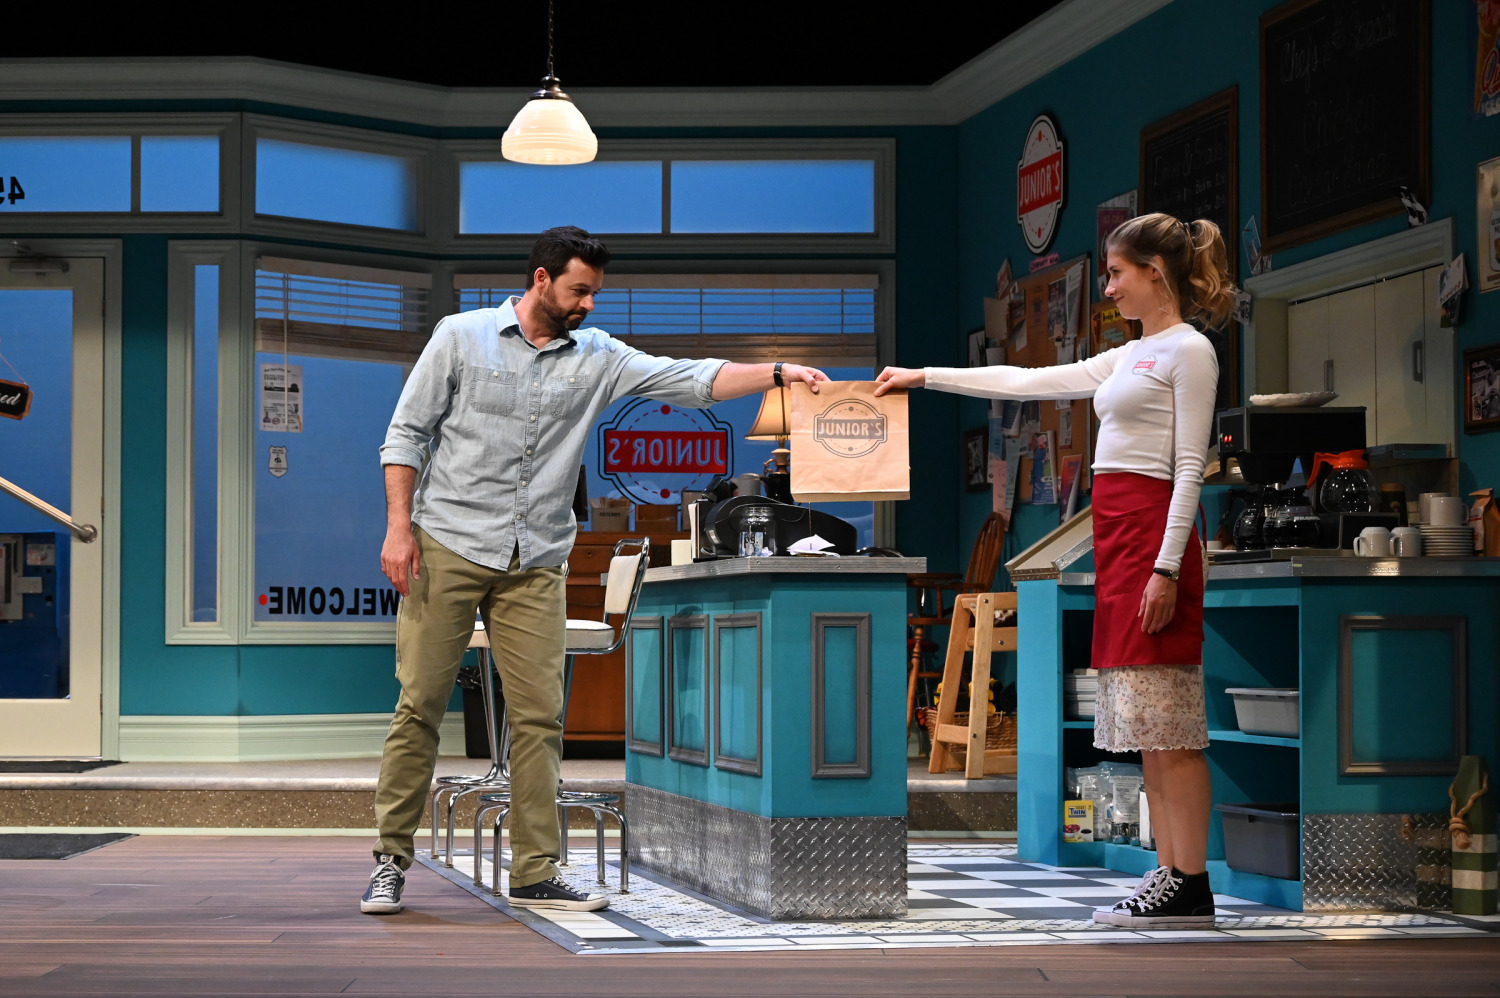 Two actors in a diner set, one passing a takeout bag to the other. The diner features a blue and white color scheme with a sign that reads 'Junior's'.